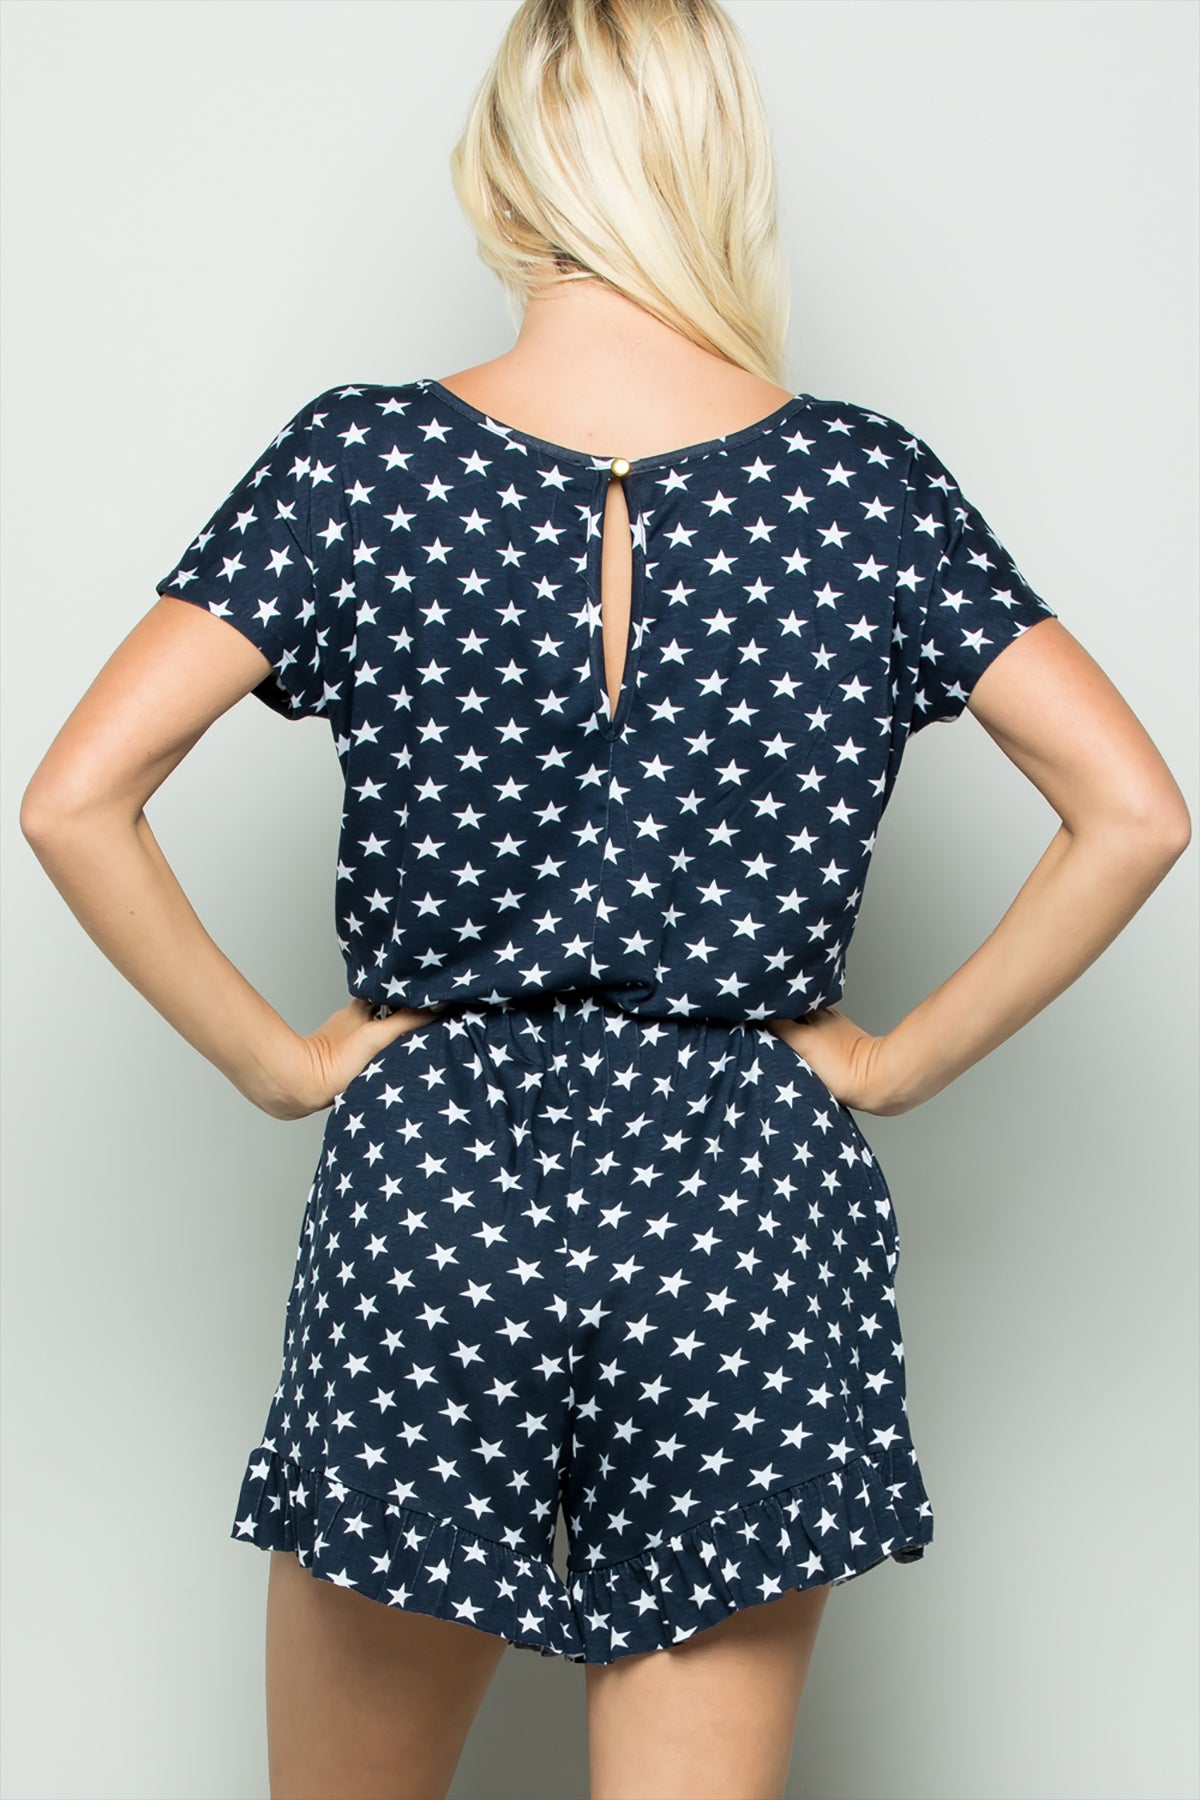 PLUS SIZE STAR PRINT ROMPER WITH KEYHOLE AND BUTTON BACK DETAIL 2-2-2